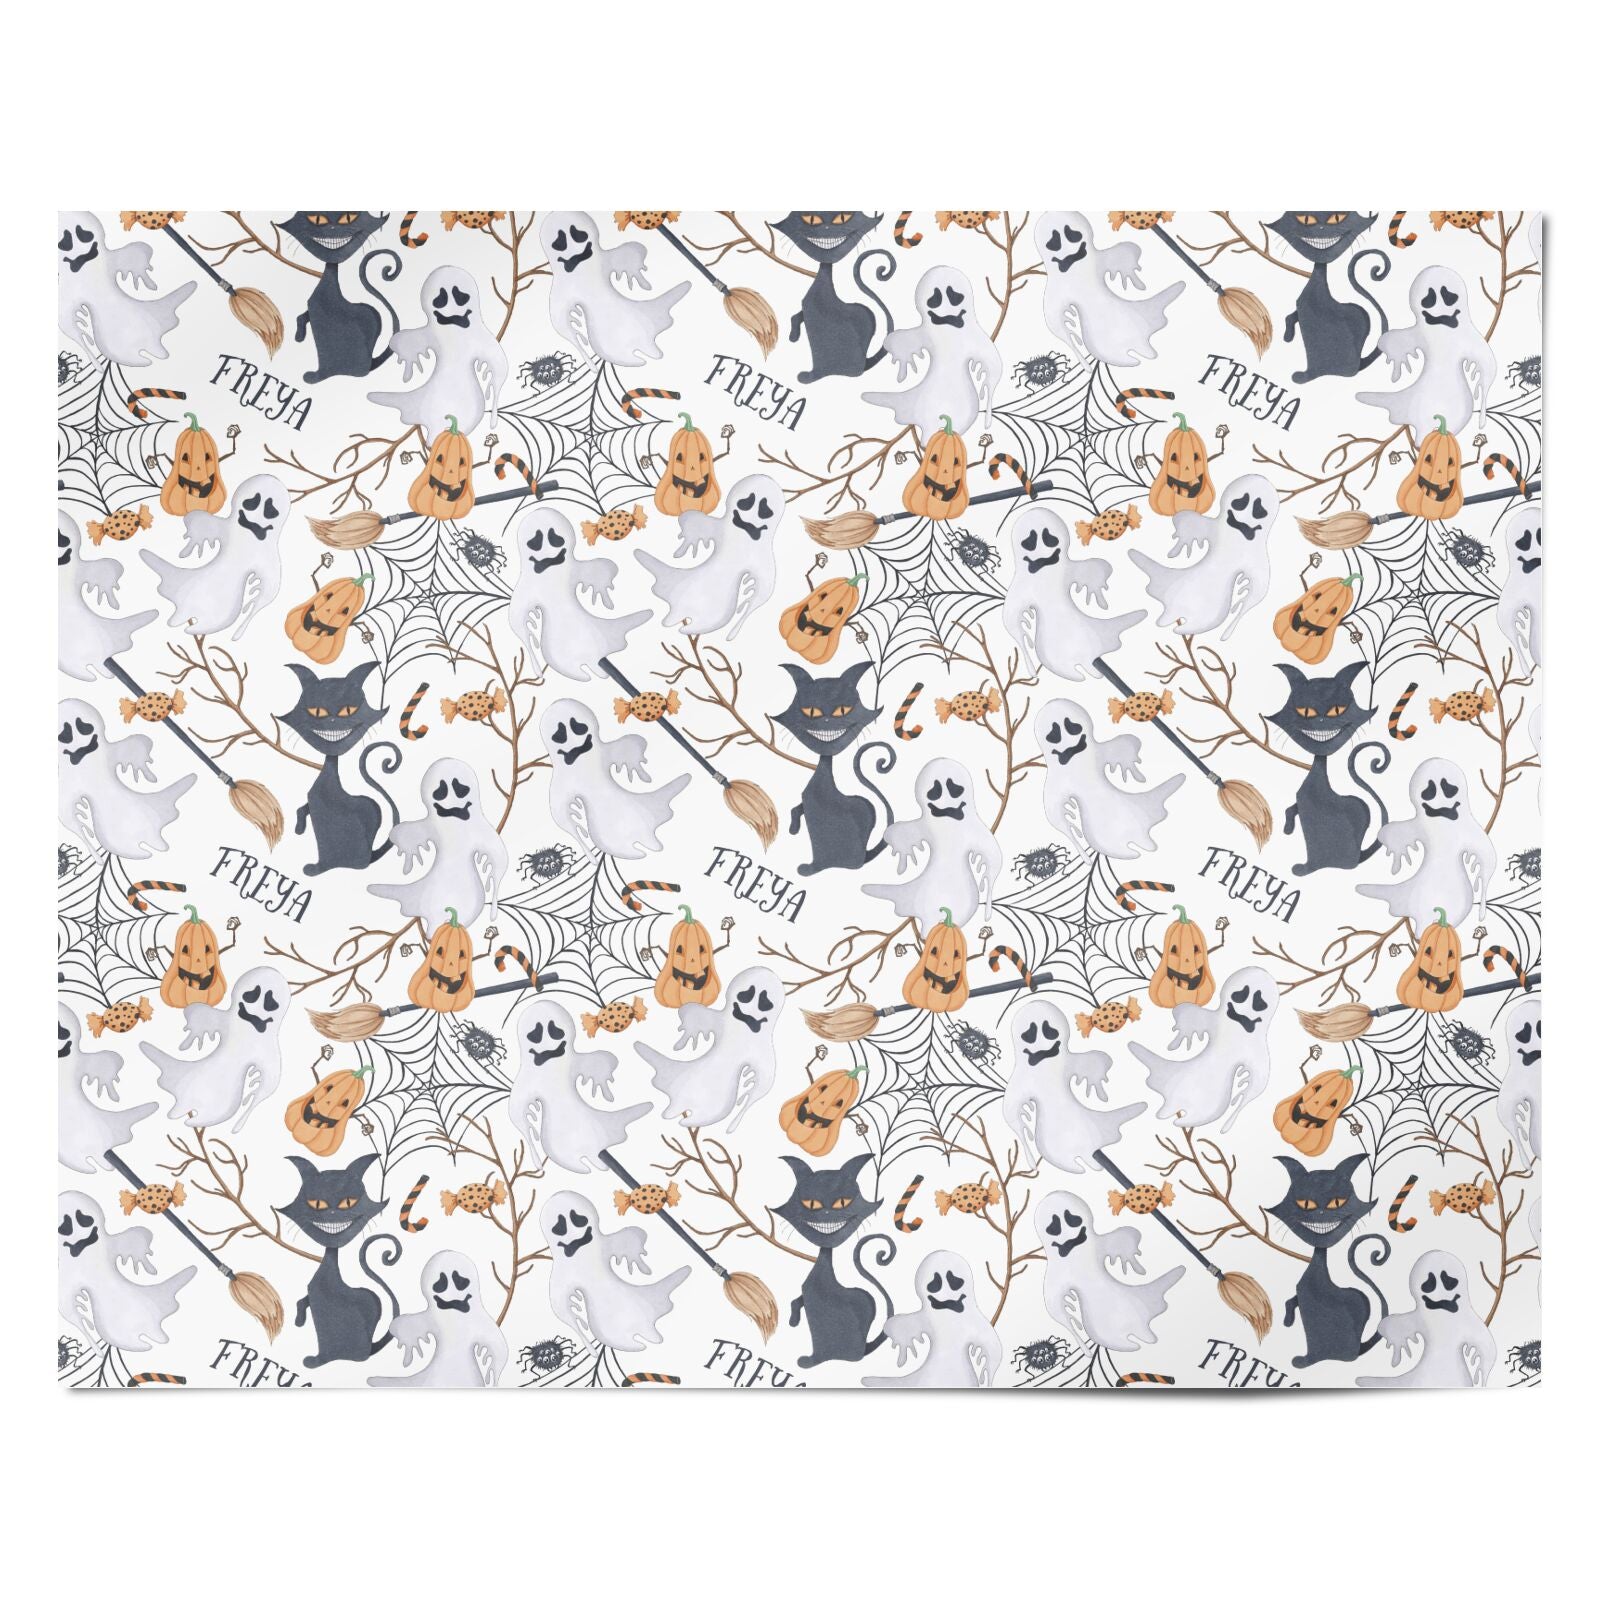 Grinning Cat Halloween Personalised Wrapping Paper Alternative